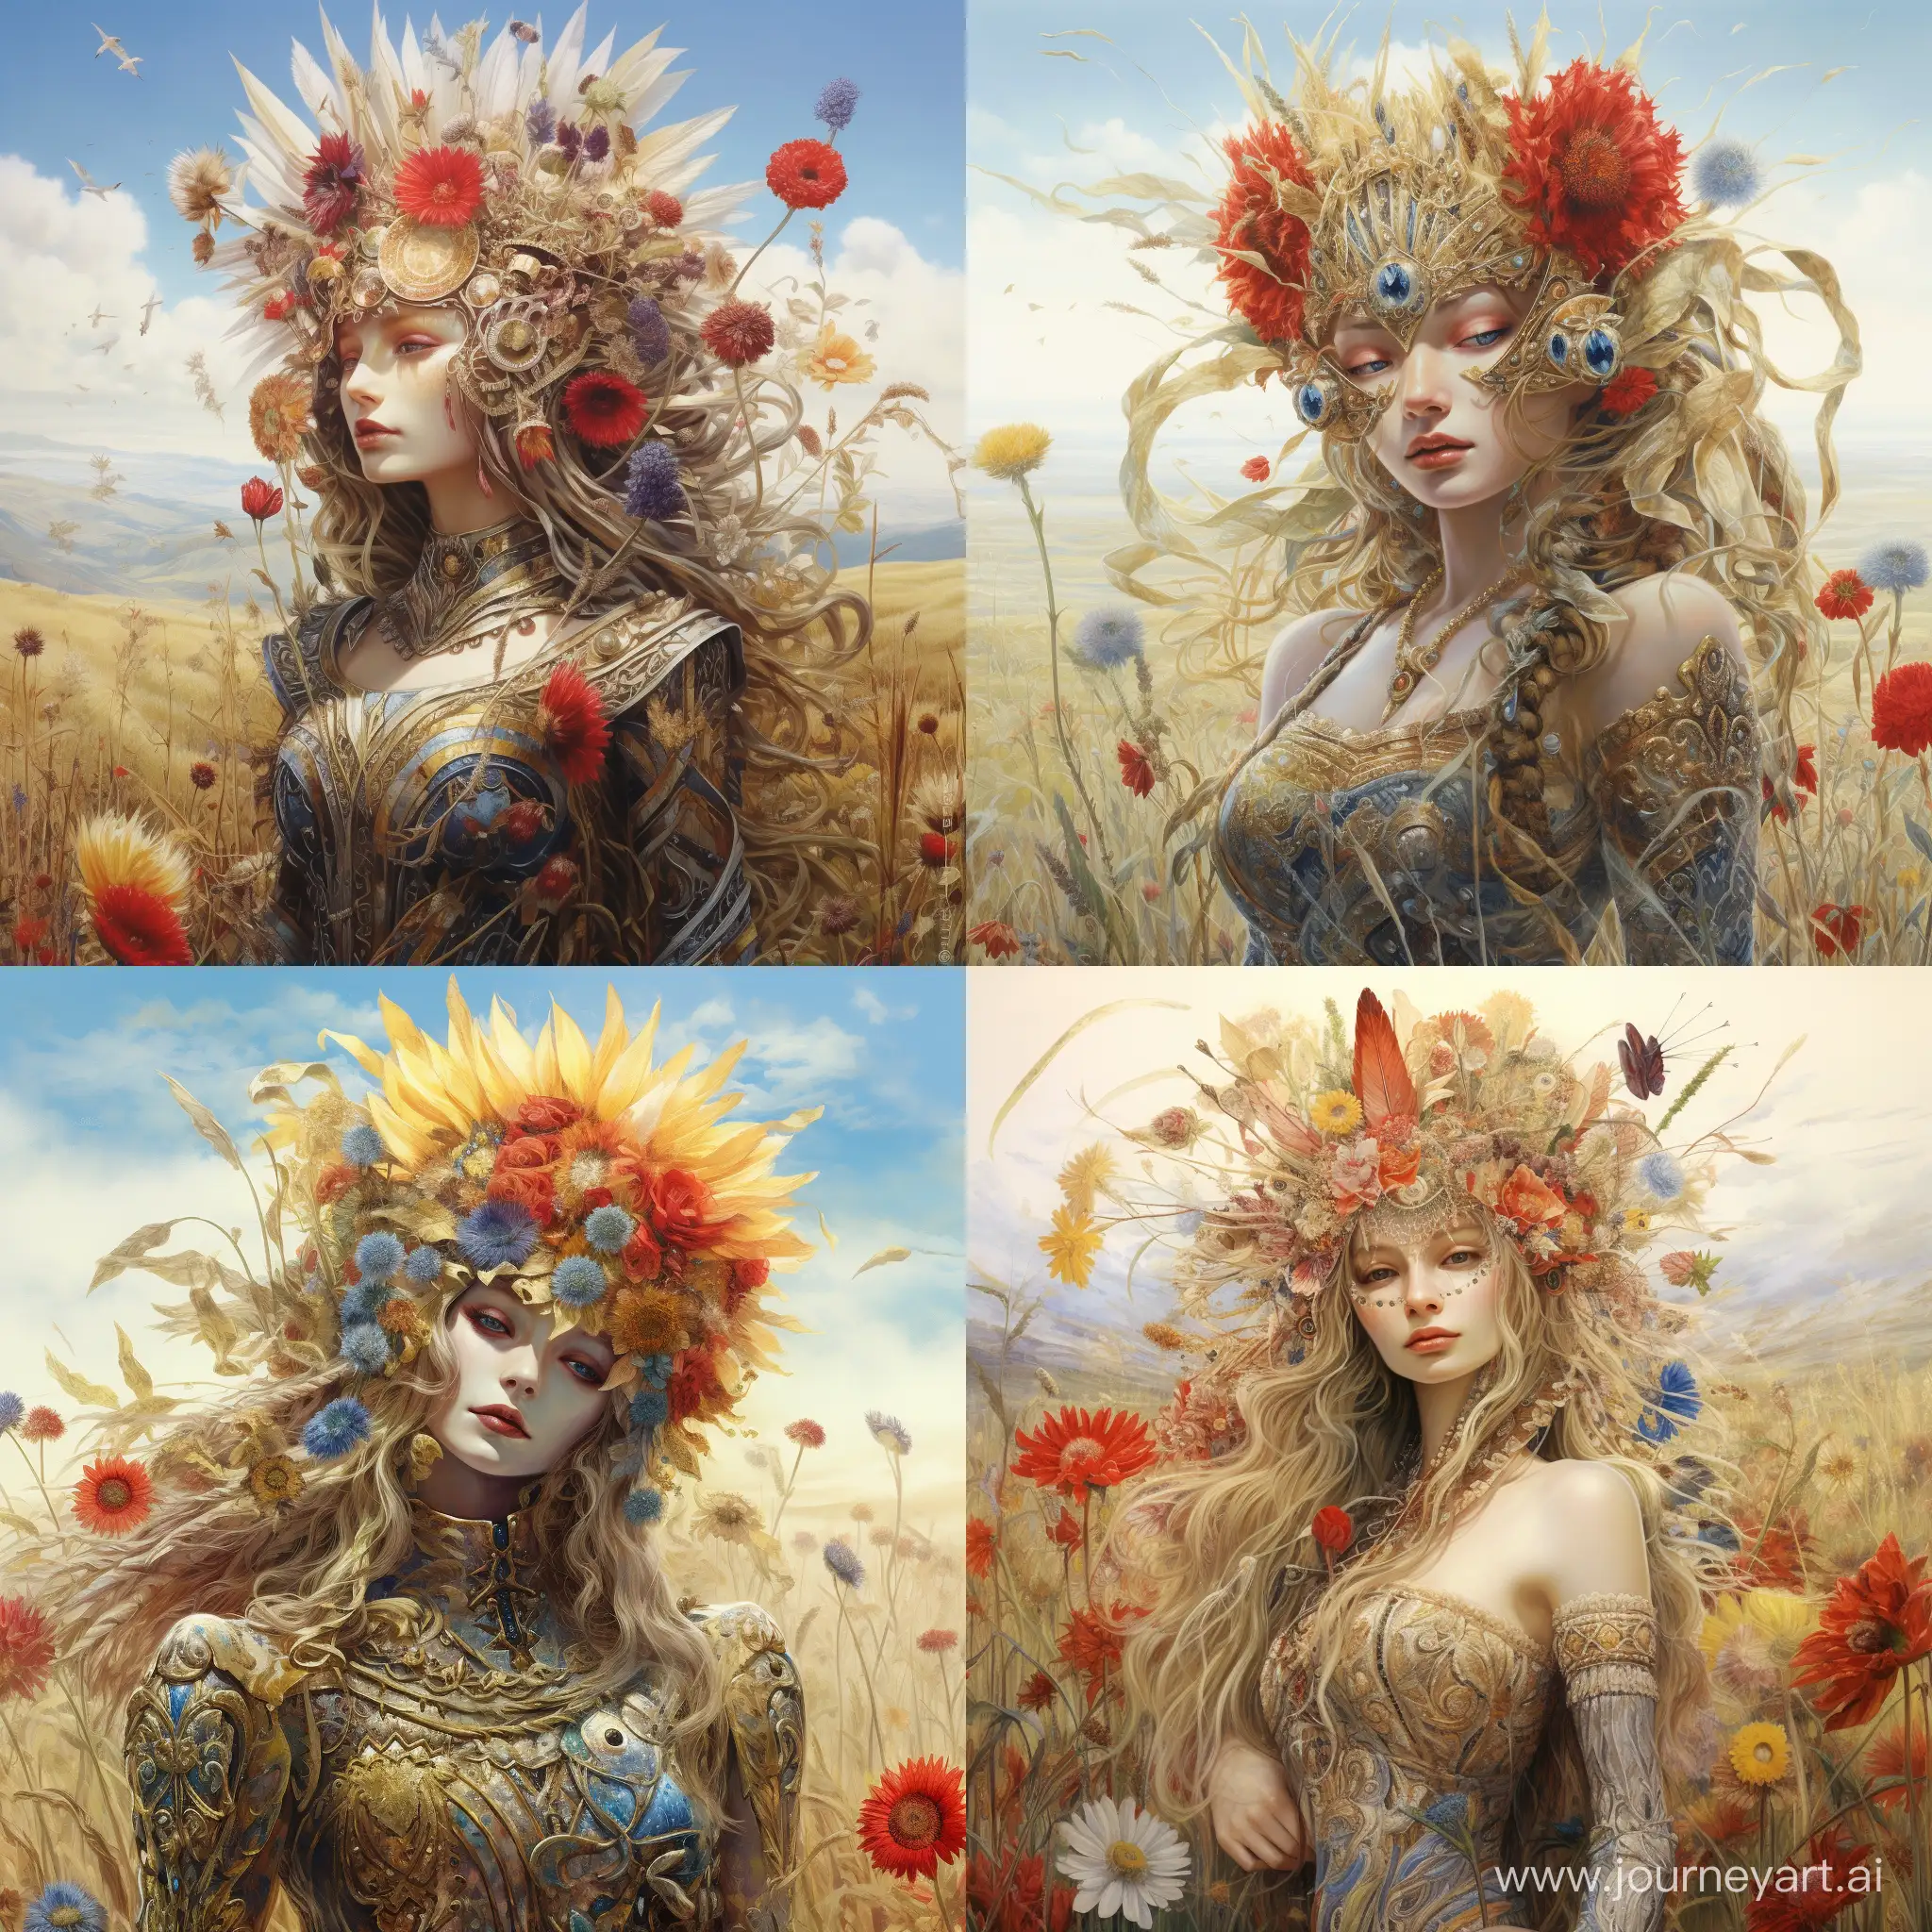 **Tomasz Alen Kopera's watercolor illustration depicting of a elaborate costumes art of the queen in flower crown, richly decorated with jewels, luxury accessories, diamonds, leaves, poppies and cornflowers, stands on the edge of a summer field of rye on a hill in the distance overlooking a summer valley with a ocean and floral fields, Alexander McQueen, Ruth Sanderson, Josephine Wall, ethereal illustrations, romanticized depictions of wilderness, Karol Bak, icelandic nature, foggy landscape, calm and serene beauty, leaves, beautiful flowers, dreamy scenes, tenderness and purity, iconic album covers, watercolor stains and splashes, in the style of vintage illustrations design, isolated on white, white background